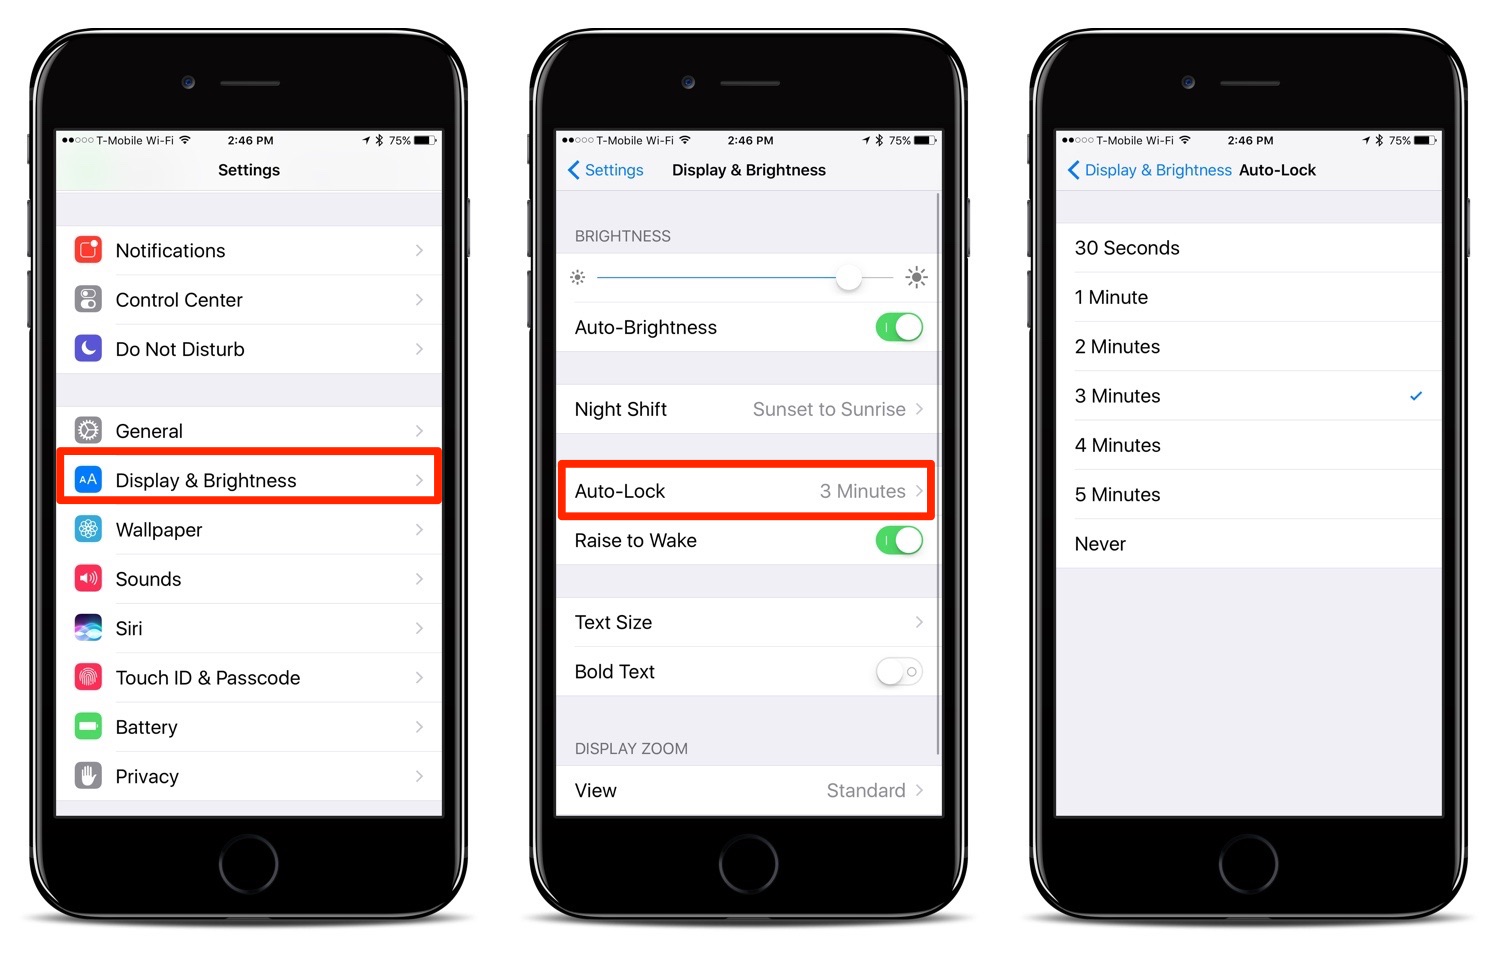 How to Change the Auto-Lock Time Setting on Your iPhone Running iOS 10